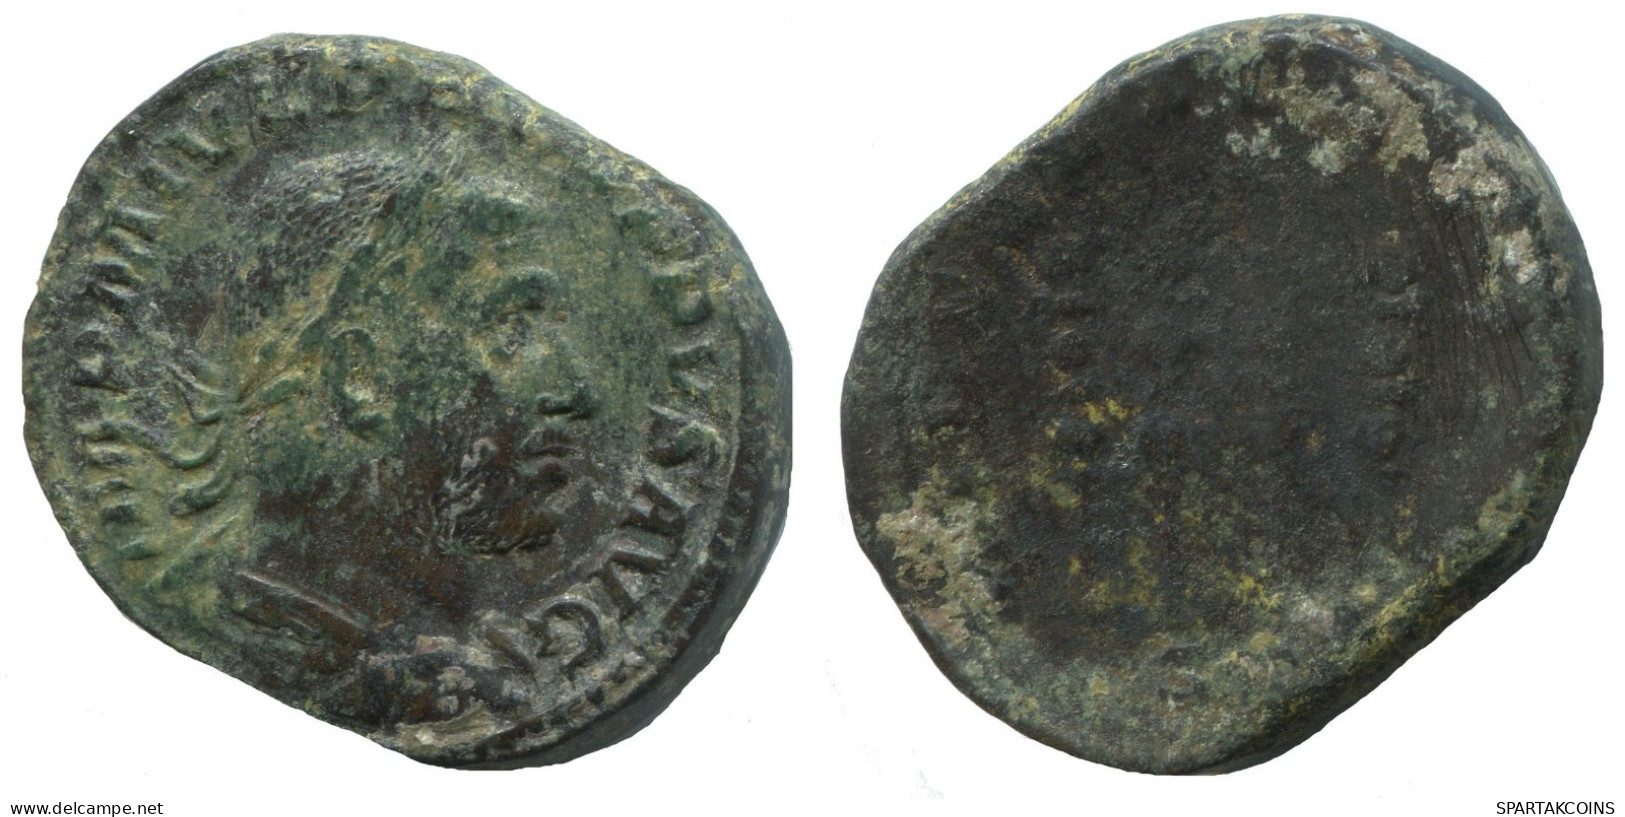 PHILIP I The ARAB Thessalonica 244AD FIDES EXERCITVS 17.8g/31mm #NNN2055.48.D.A - Provincie